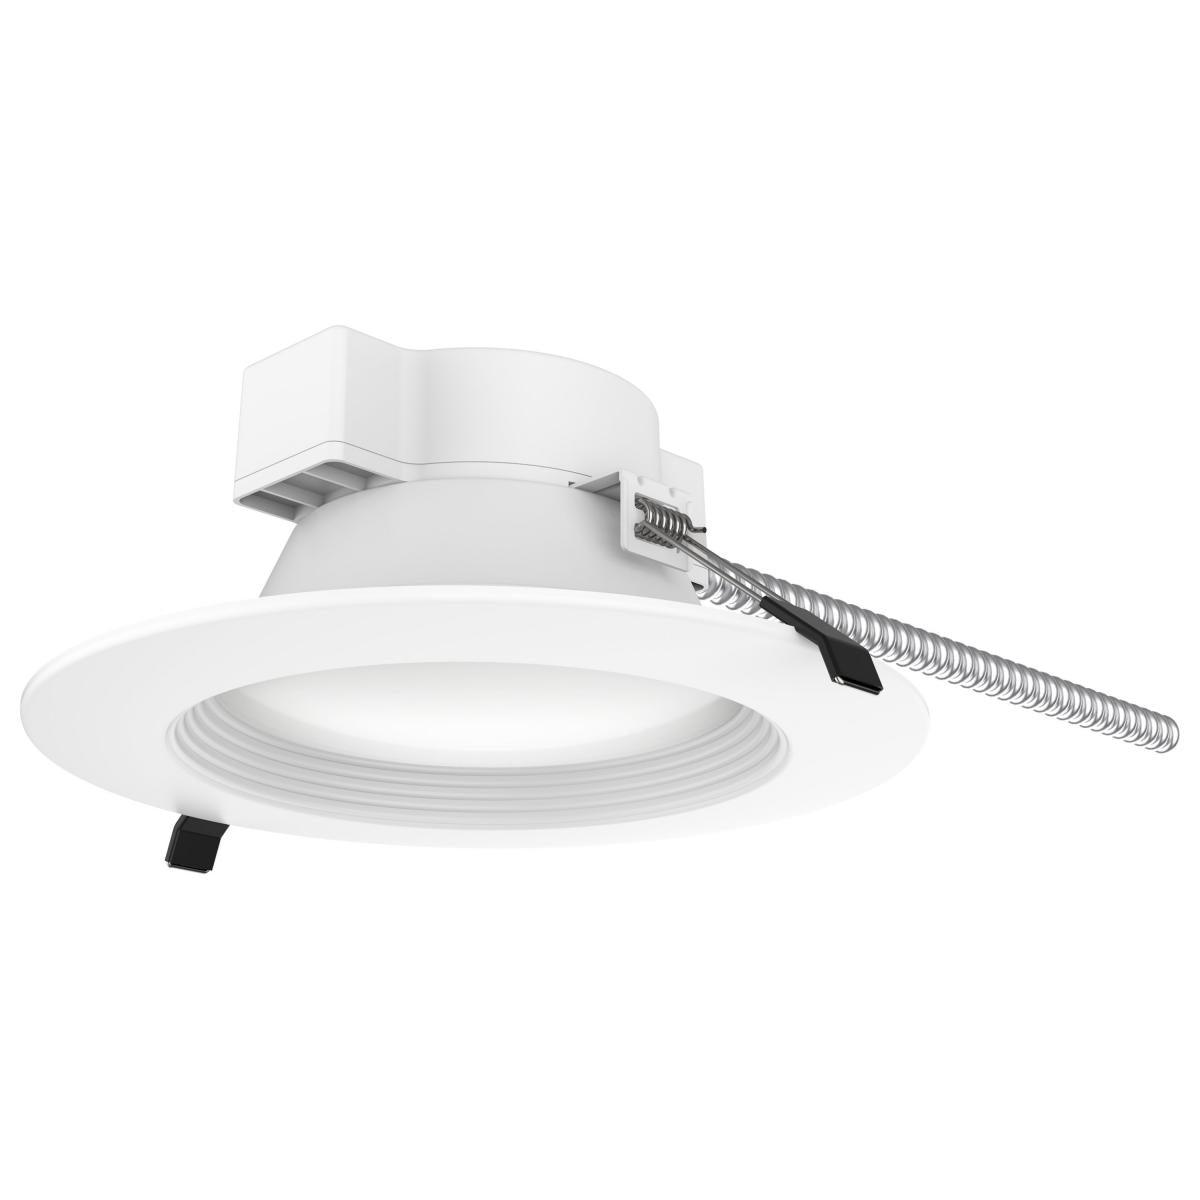 8 Inch Commercial LED Downlight, Round, 22 Watt, 2200 Lumens, Selectable CCT, 2700K to 5000K, Baffle Trim